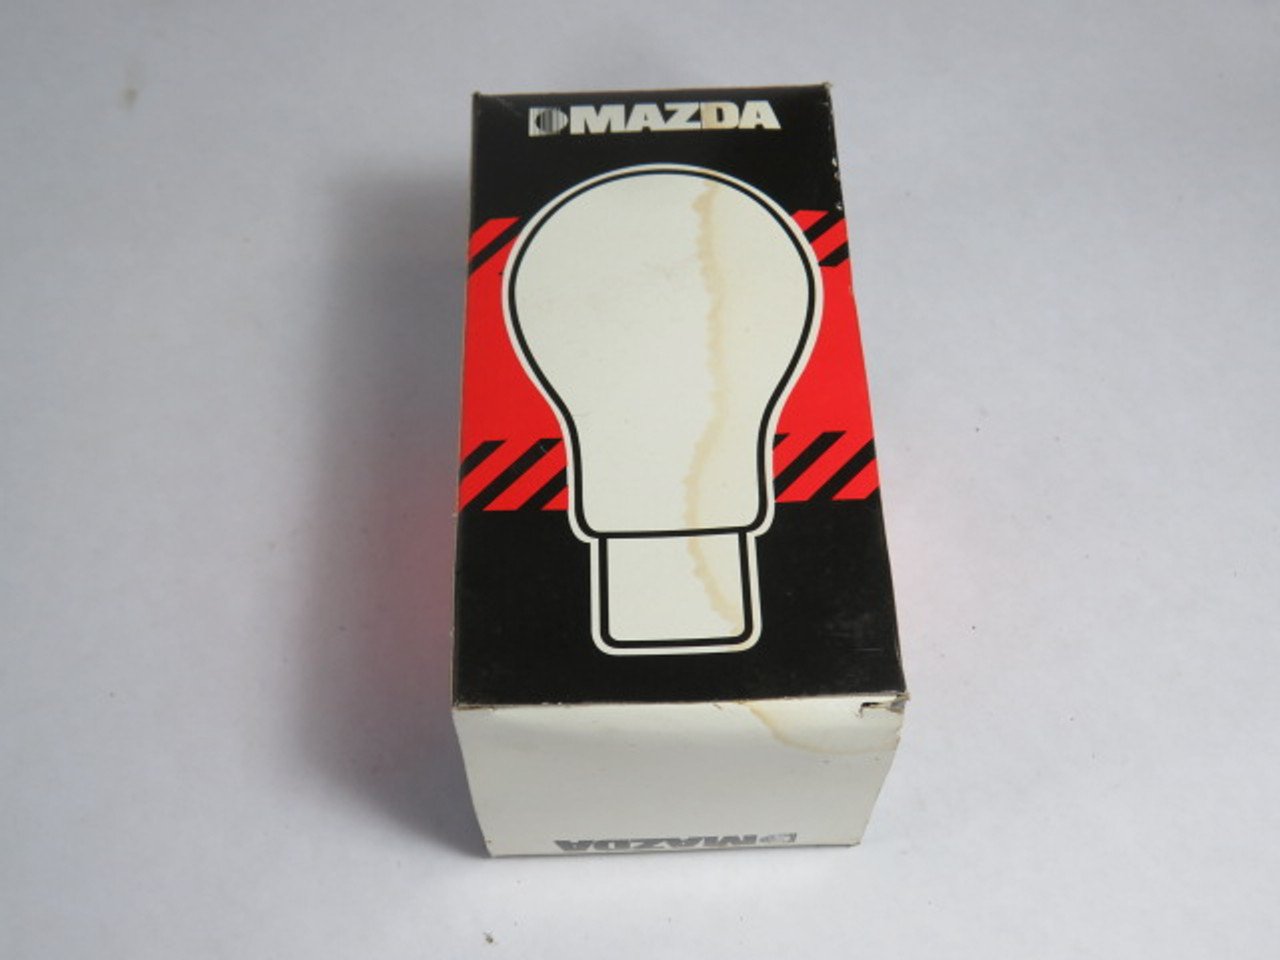 Mazda RC-VC Frosted Light Bulb 100W 220-240VAC ! NEW !